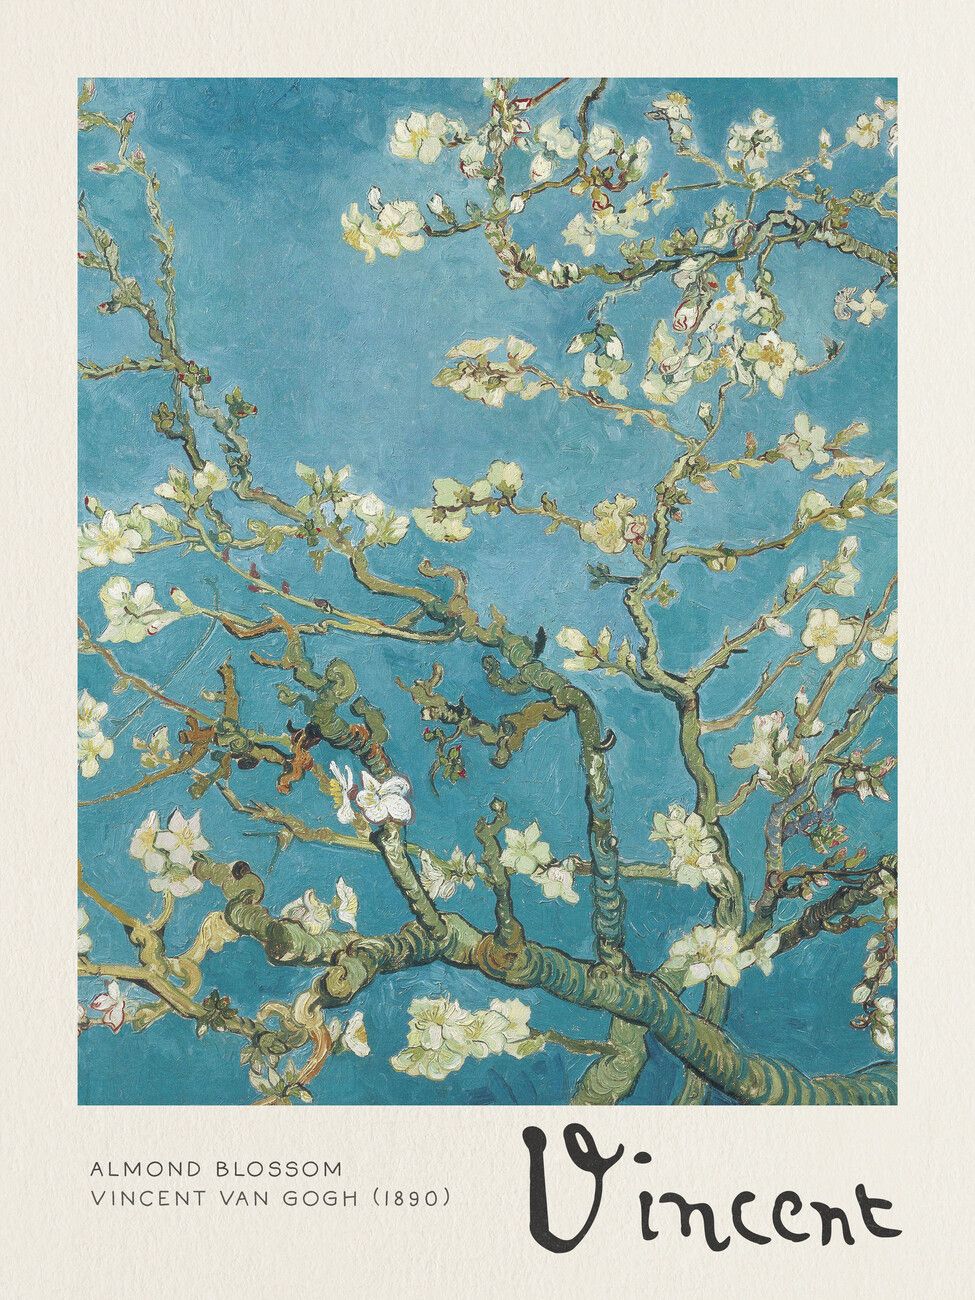 Wall Art Print | Almond Blossom – Vincent Van Gogh | Europosters With Almond Blossoms Wall Art (View 5 of 15)